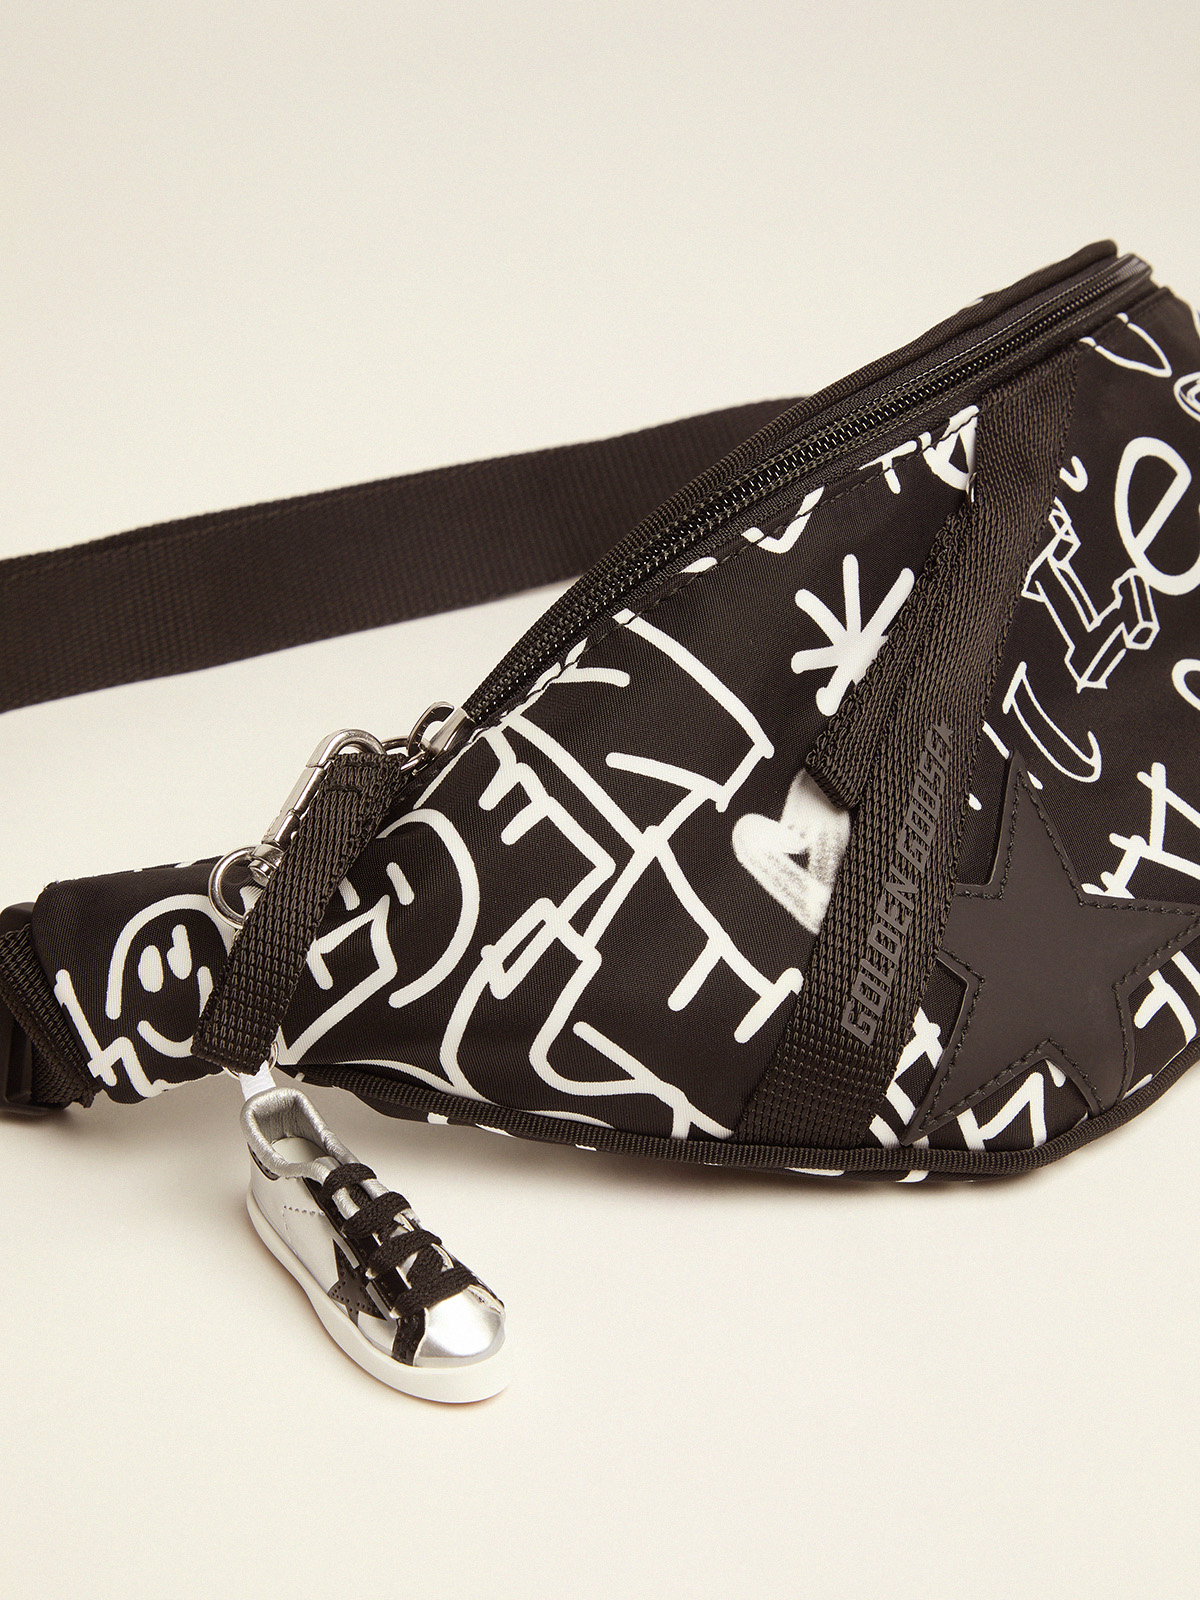 Journey belt bag in black nylon with contrasting white decorations